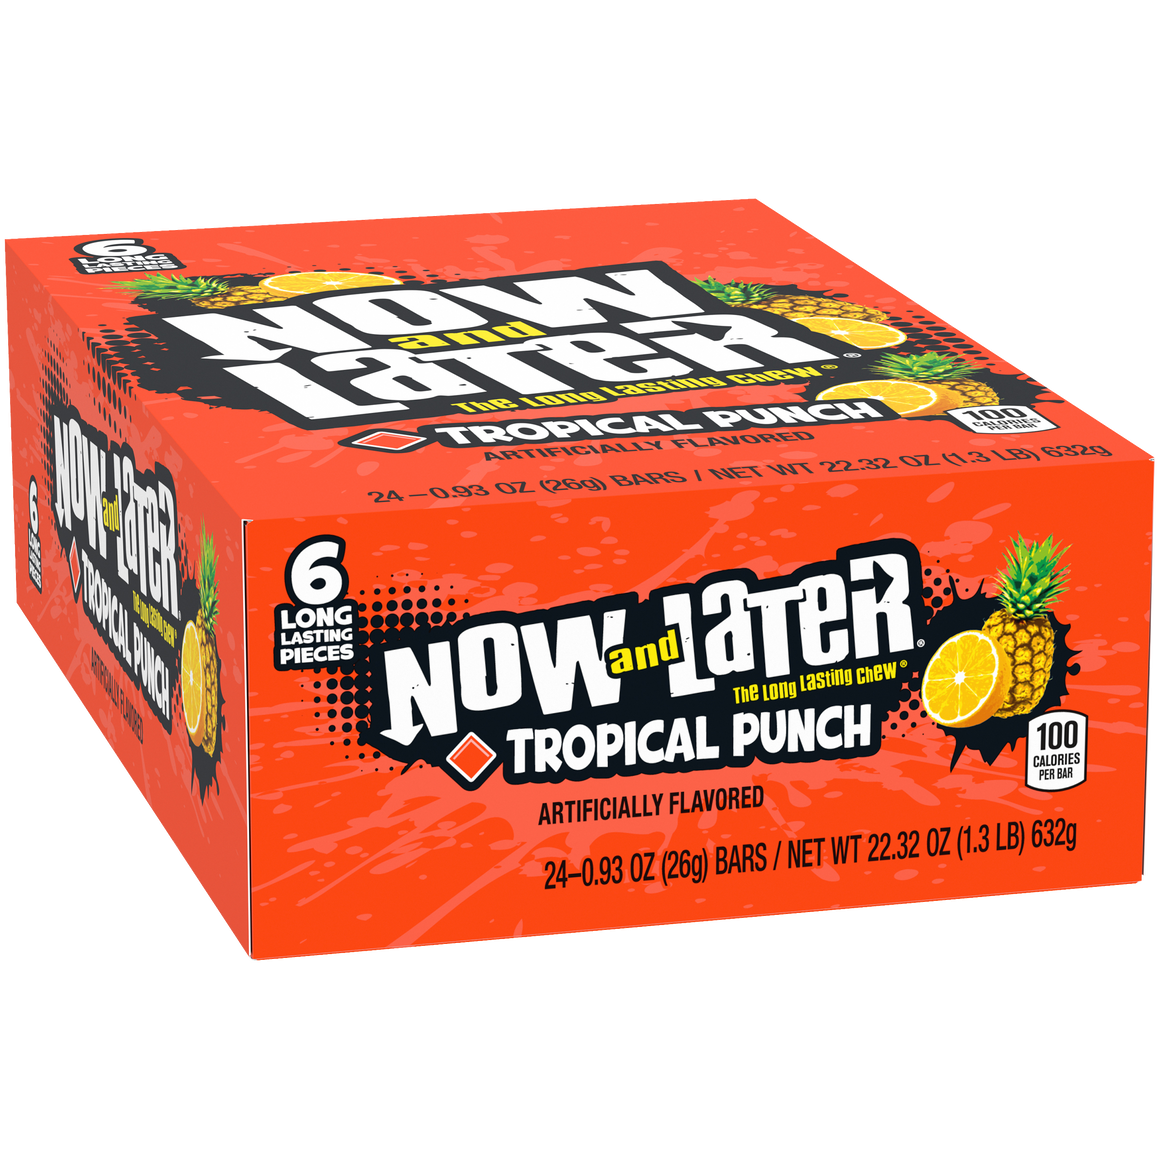 All City Candy Now and Later Tropical Punch Candy 6-Pack - Case of 24 Taffy Ferrara Candy Company For fresh candy and great service, visit www.allcitycandy.com